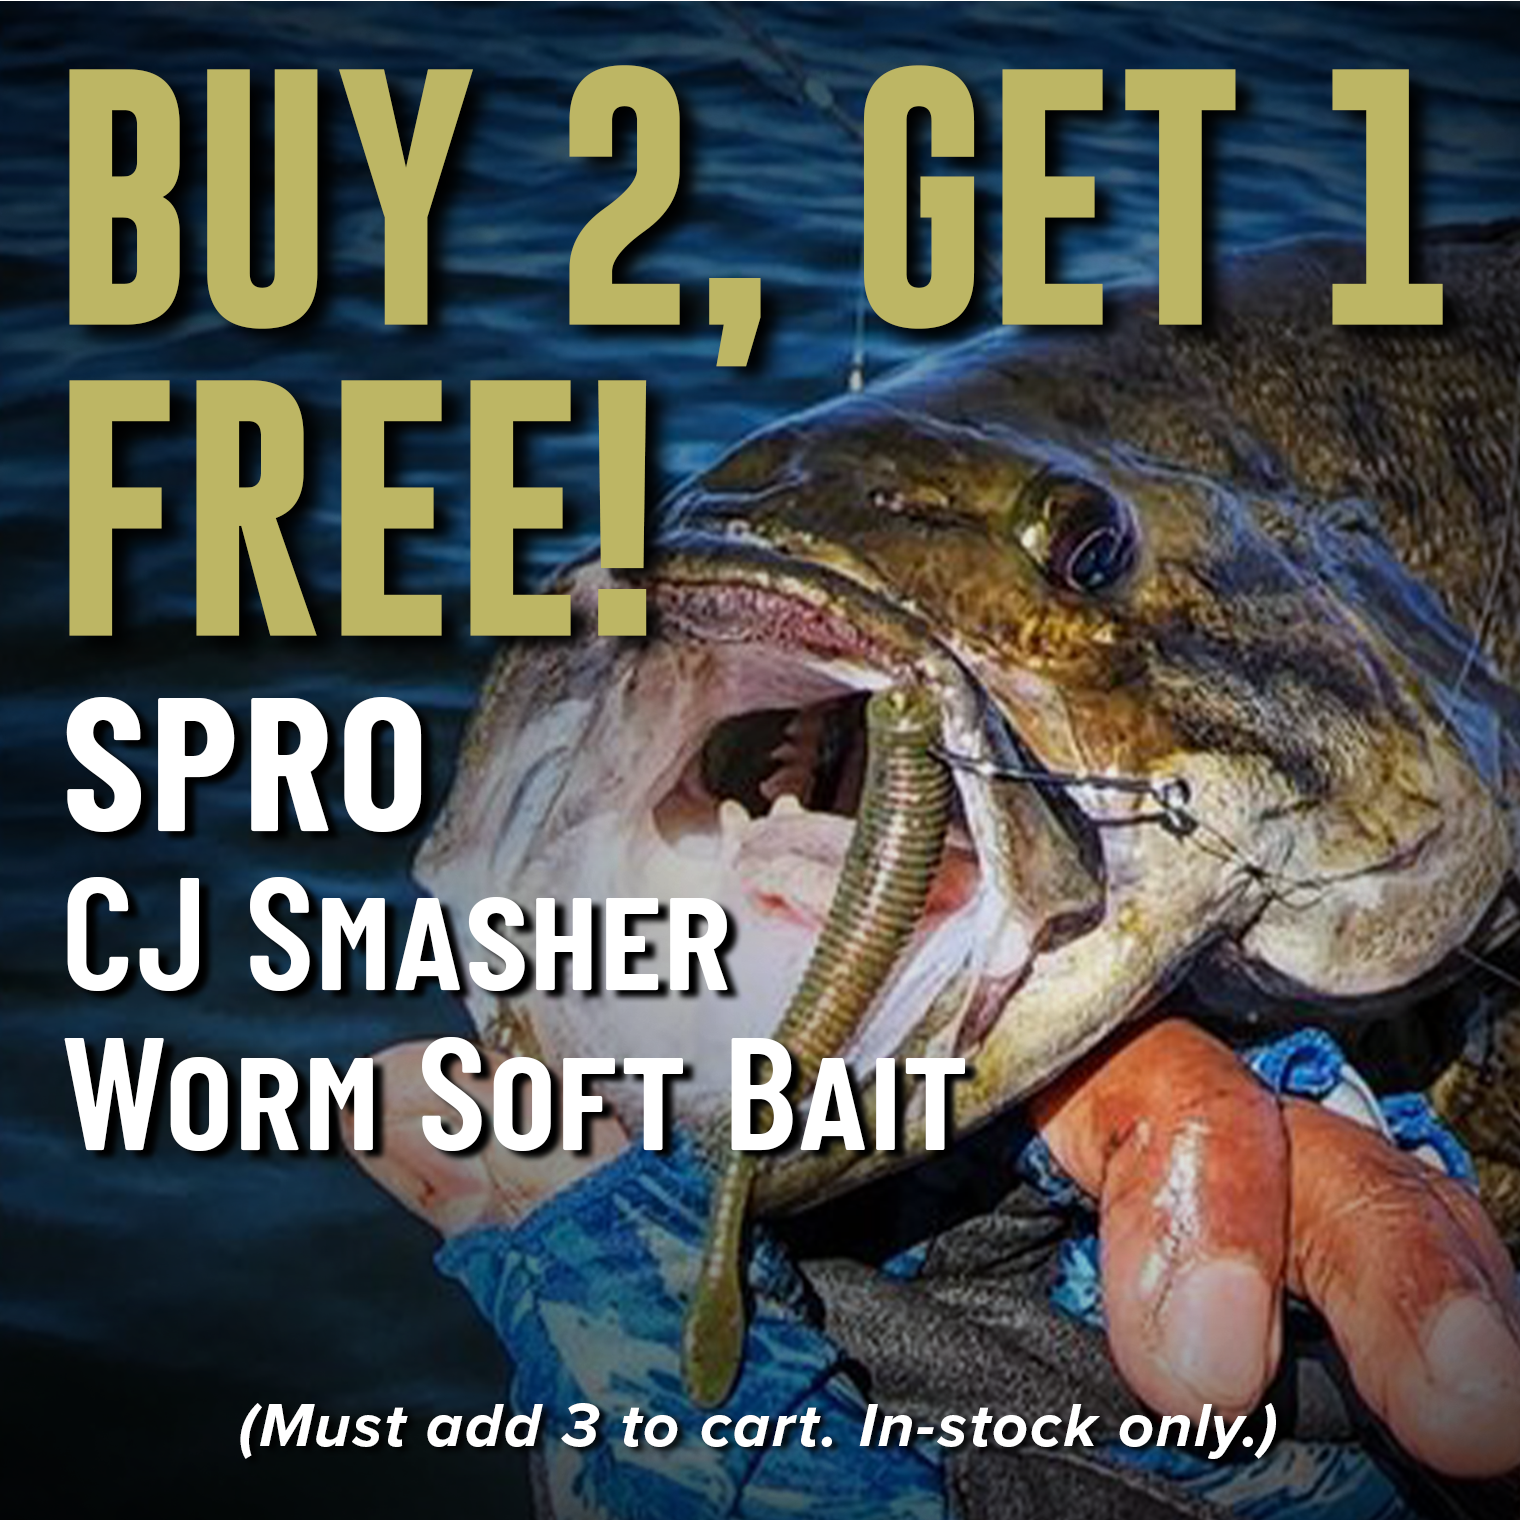 Buy 2, Get 1 Free! SPRO CJ Smasher Worm Soft Bait (Must add 3 to cat. In-stock only.)